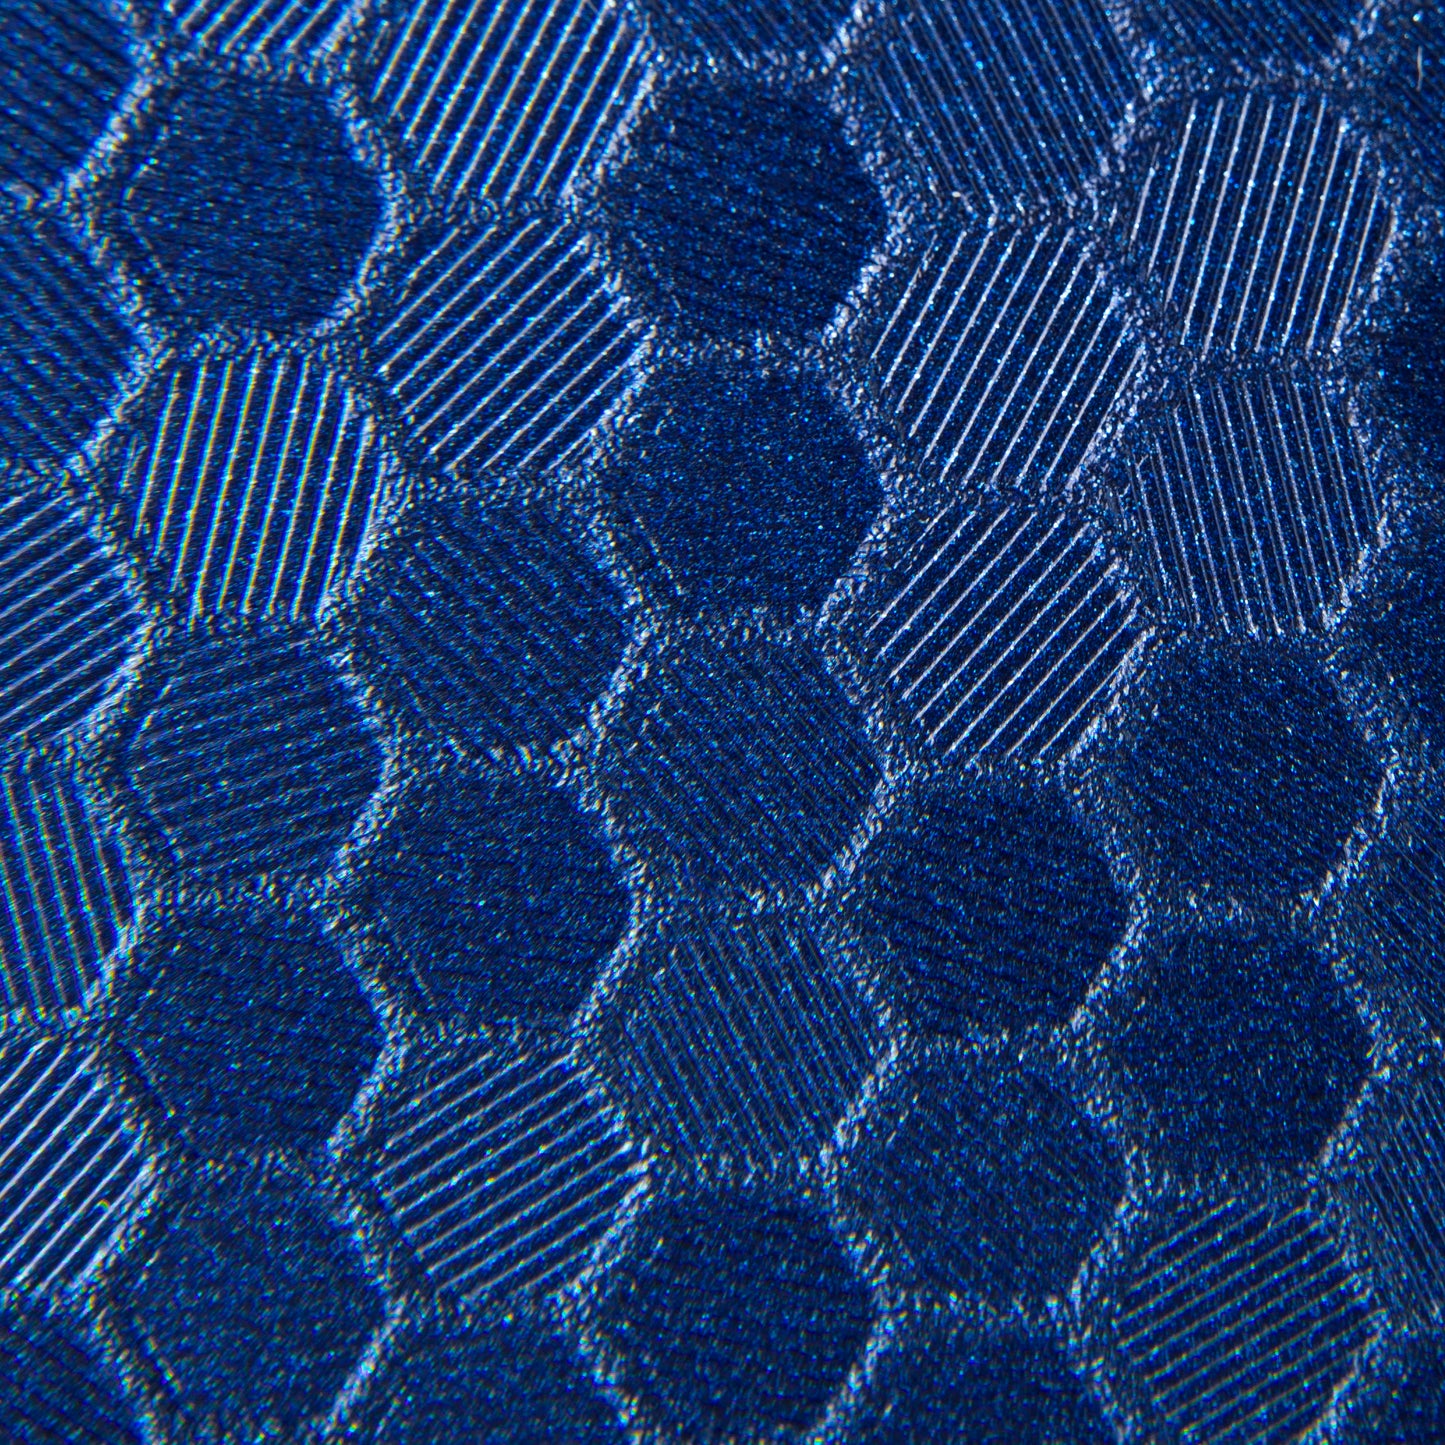 close up swatch of blue hex pattern. Hexagonal shapes with cross hatching in between 